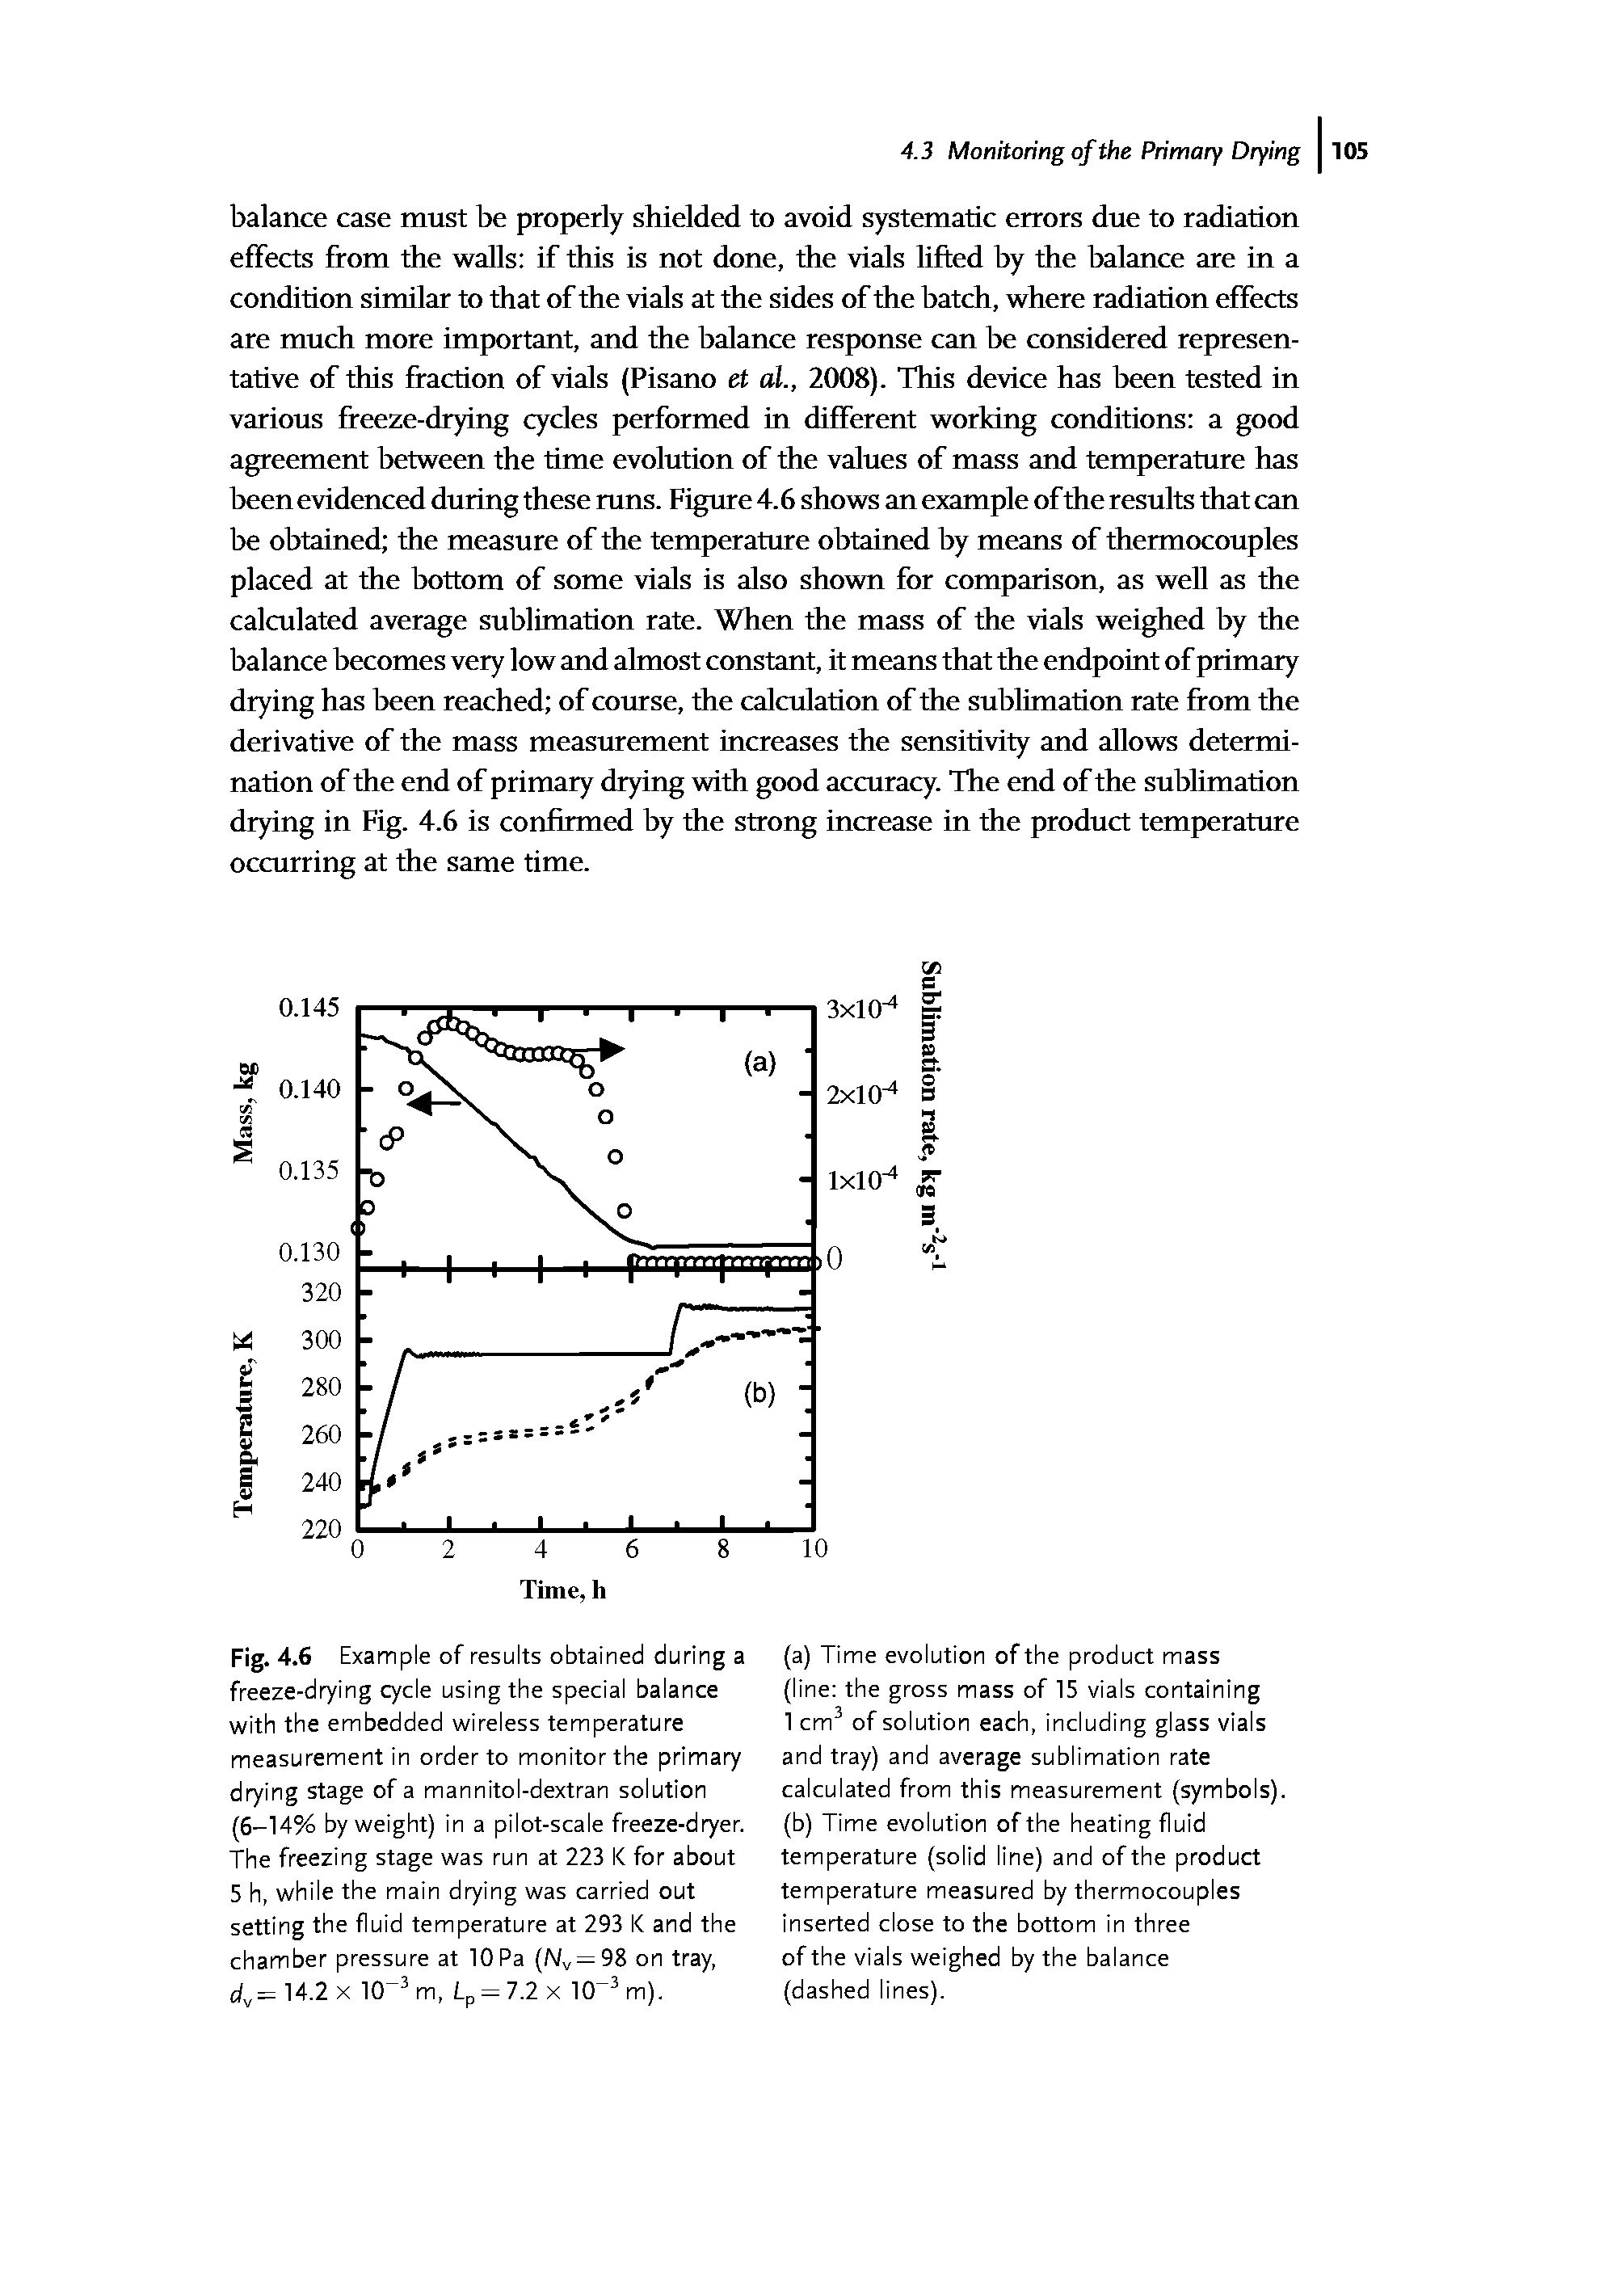 Fig. 4.6 Example of results obtained during a freeze-drying cycle using the special balance with the embedded wireless temperature measurement in order to monitor the primary drying stage of a mannitol-dextran solution (6-14% by weight) in a pilot-scale freeze-dryer. The freezing stage was run at 223 K for about 5 h, while the main drying was carried out setting the fluid temperature at 293 l< and the chamber pressure at 10 Pa (Nv = 98 on tray, dv= 14.2 X 10 m, Lp = 7.2 x 10 m).